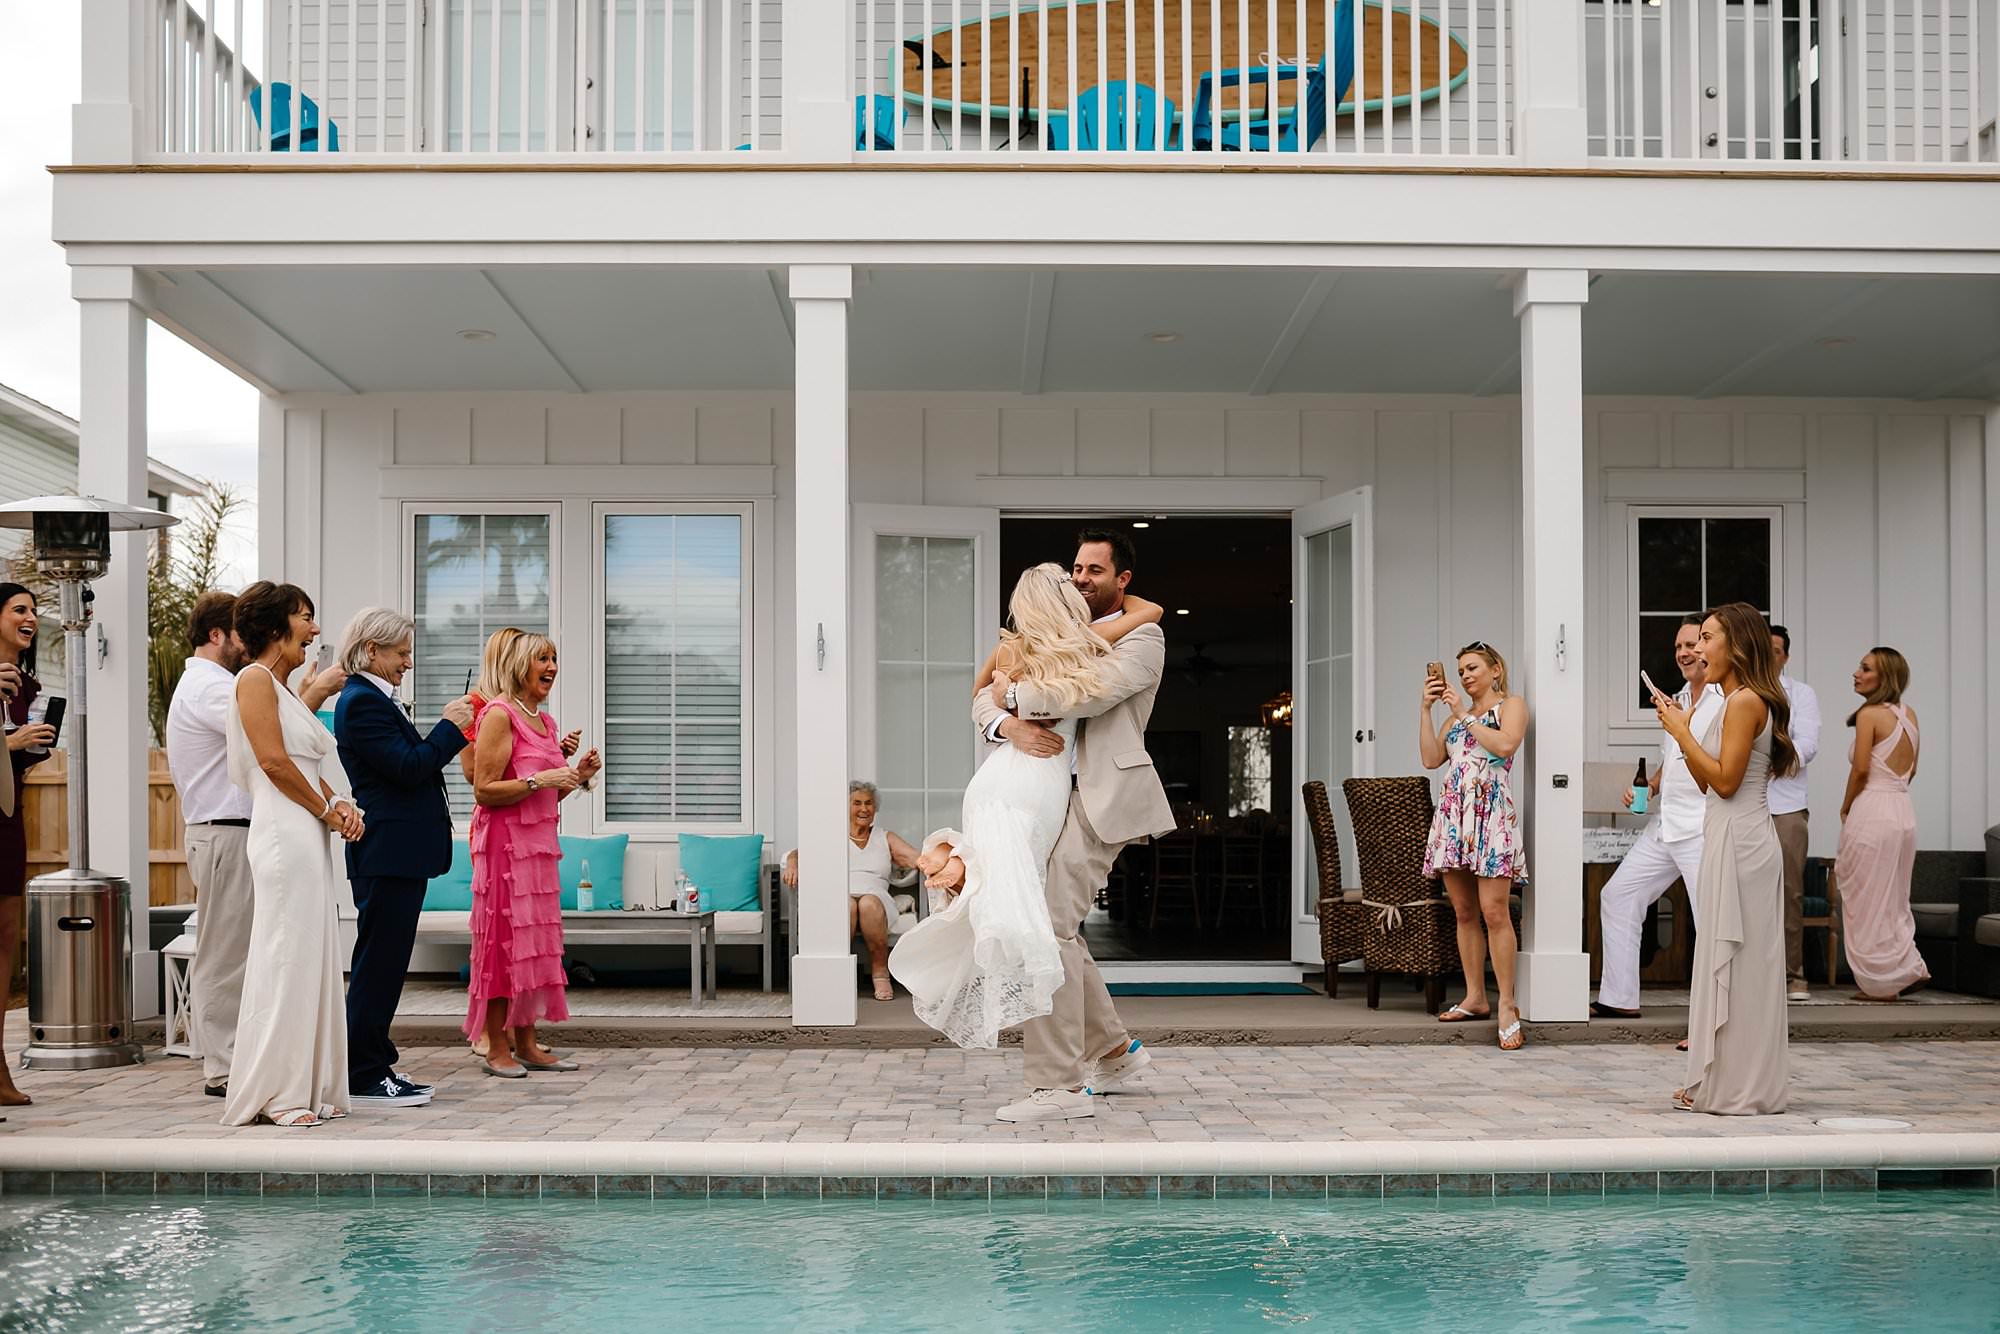 Groom spinning bride during grand entrance into wedding reception at beach house in Destin